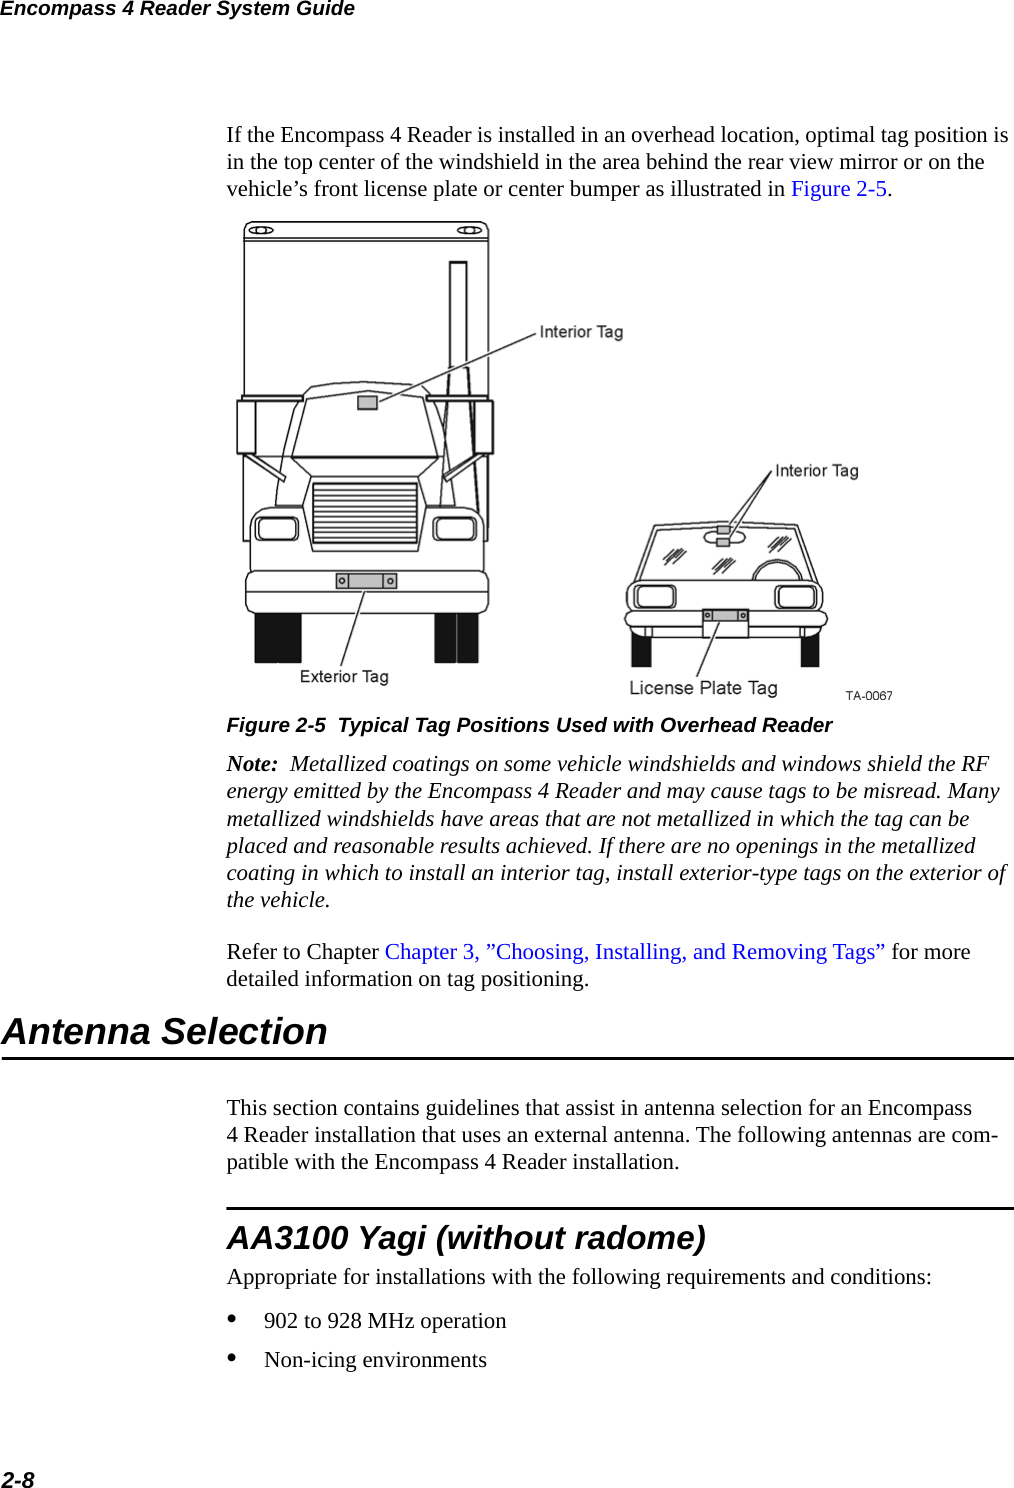 Encompass 4 Reader System Guide2-8If the Encompass 4 Reader is installed in an overhead location, optimal tag position is in the top center of the windshield in the area behind the rear view mirror or on the vehicle’s front license plate or center bumper as illustrated in Figure 2-5.Figure 2-5  Typical Tag Positions Used with Overhead ReaderNote:  Metallized coatings on some vehicle windshields and windows shield the RF energy emitted by the Encompass 4 Reader and may cause tags to be misread. Many metallized windshields have areas that are not metallized in which the tag can be placed and reasonable results achieved. If there are no openings in the metallized coating in which to install an interior tag, install exterior-type tags on the exterior of the vehicle.Refer to Chapter Chapter 3, ”Choosing, Installing, and Removing Tags” for more detailed information on tag positioning.Antenna SelectionThis section contains guidelines that assist in antenna selection for an Encompass4 Reader installation that uses an external antenna. The following antennas are com-patible with the Encompass 4 Reader installation.AA3100 Yagi (without radome)Appropriate for installations with the following requirements and conditions:•902 to 928 MHz operation•Non-icing environments